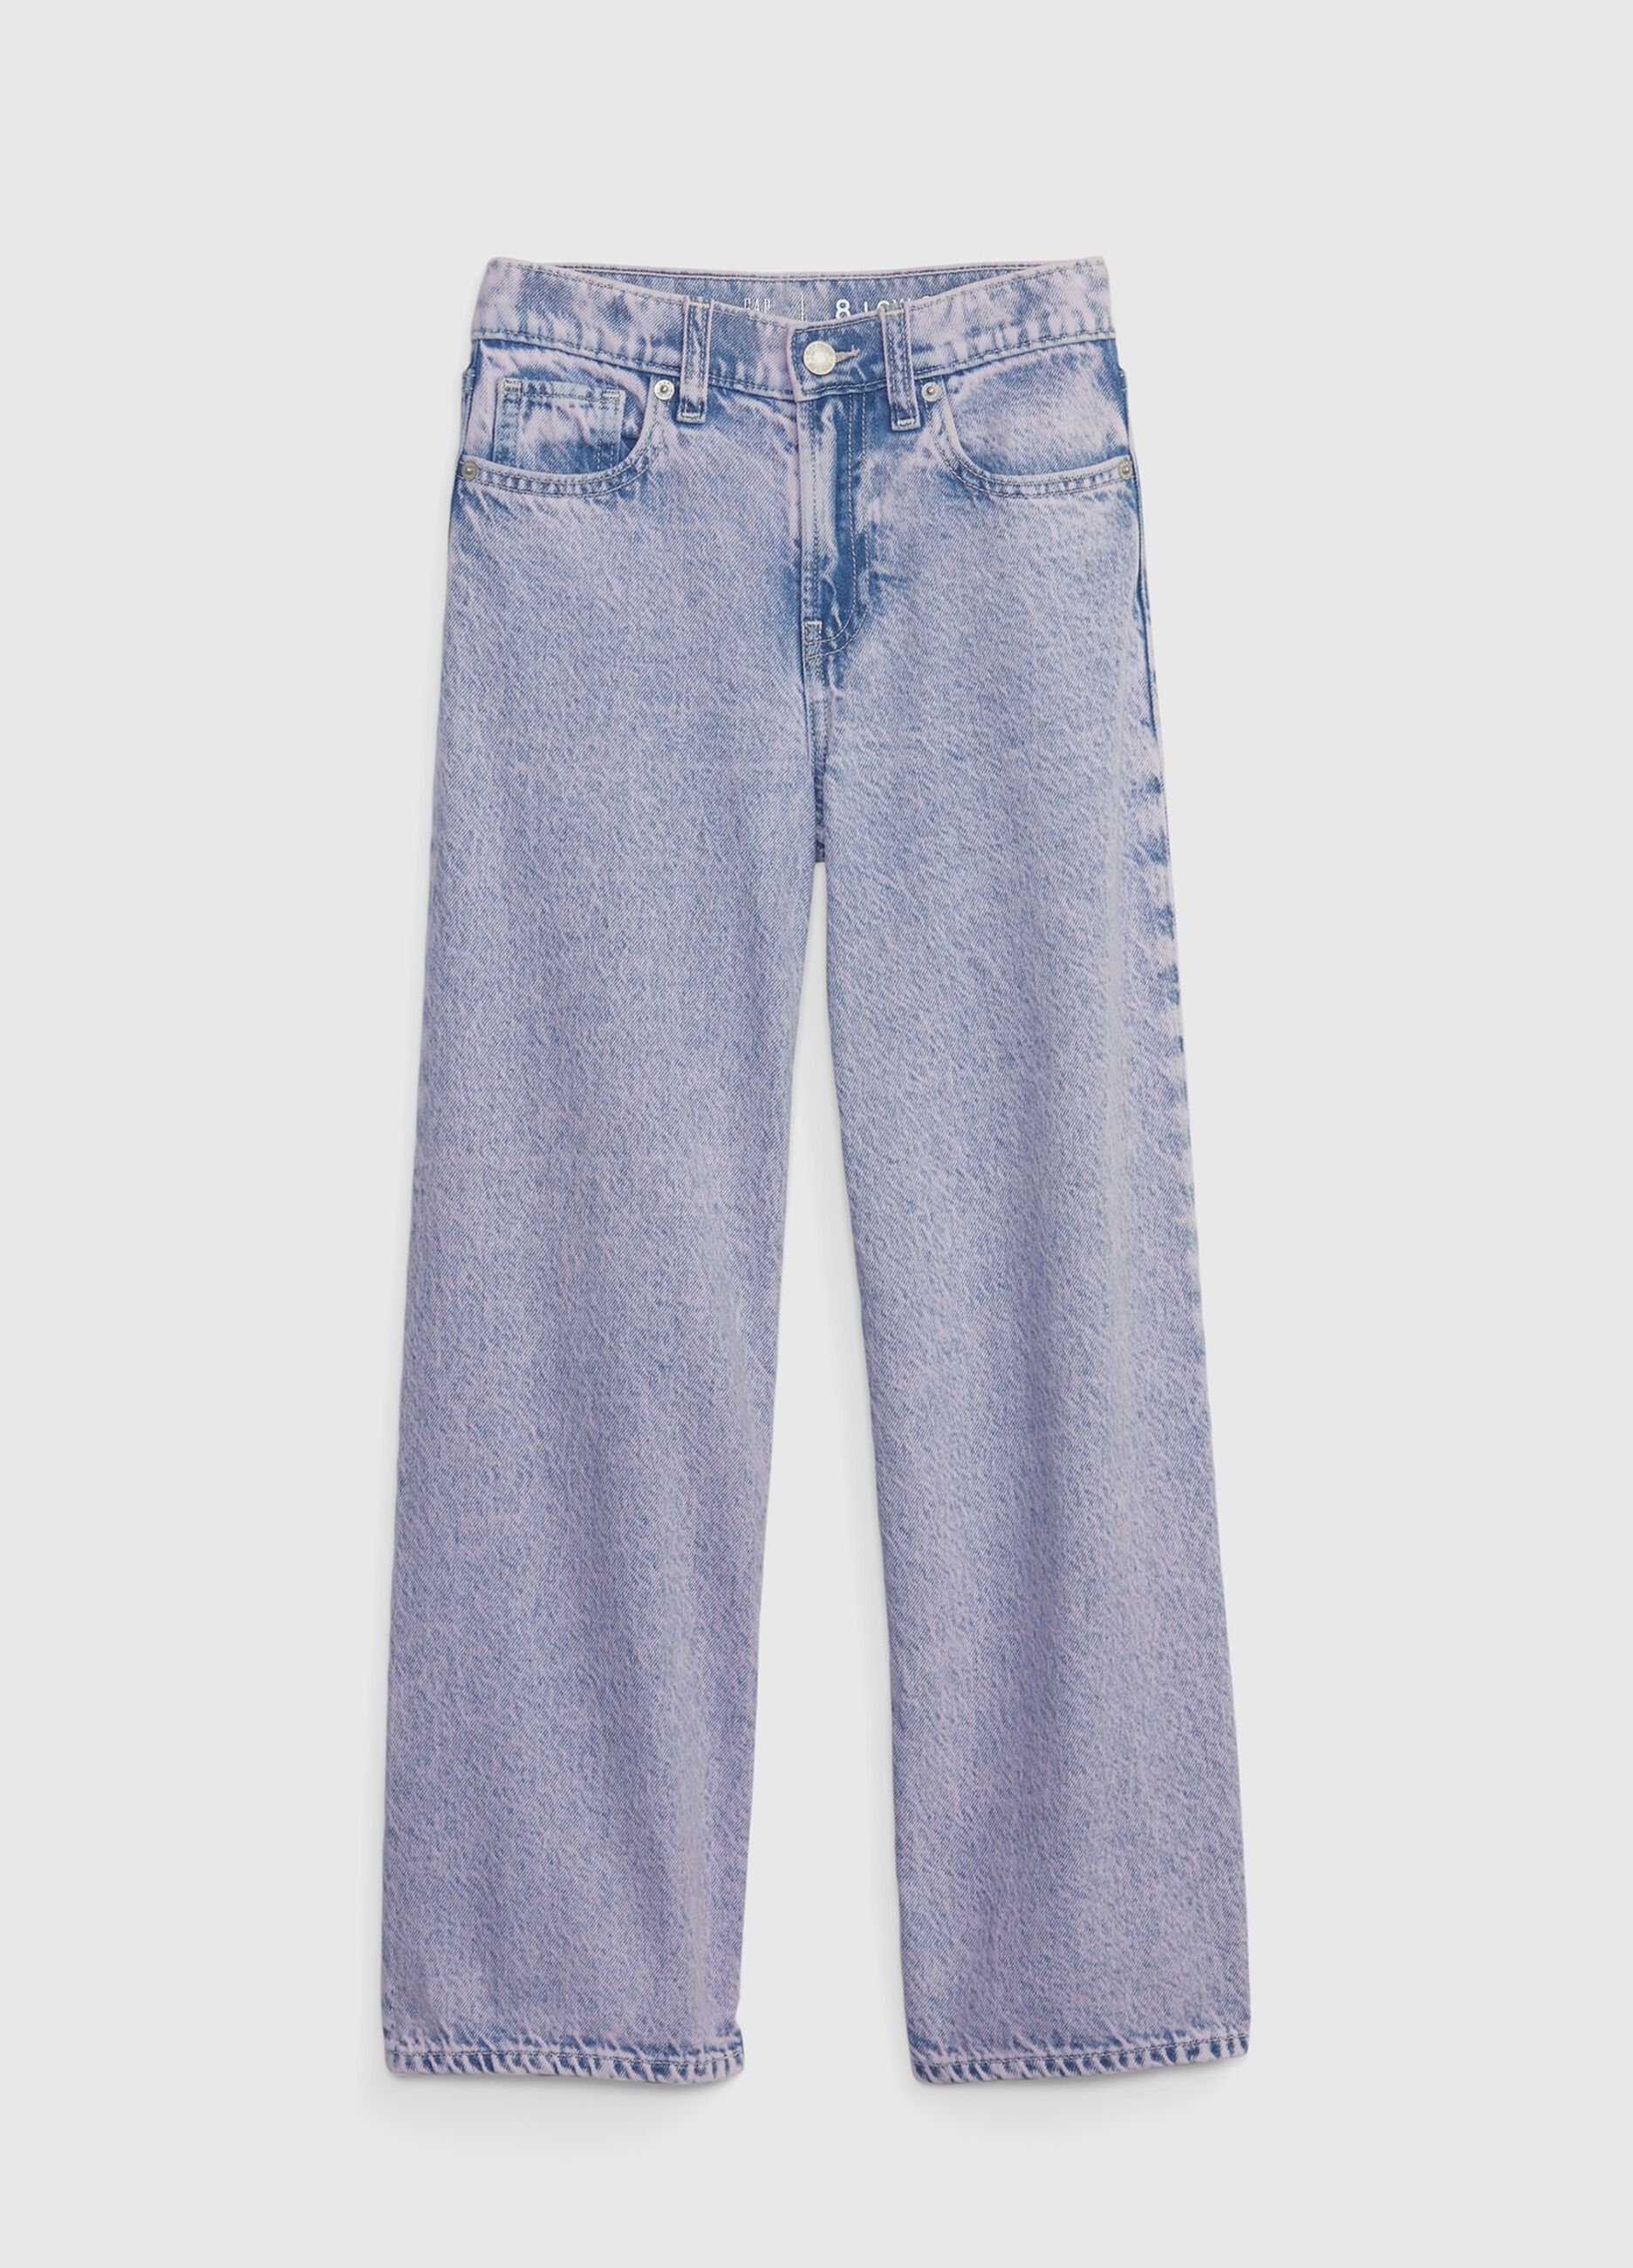 Low stride, mid-rise jeans